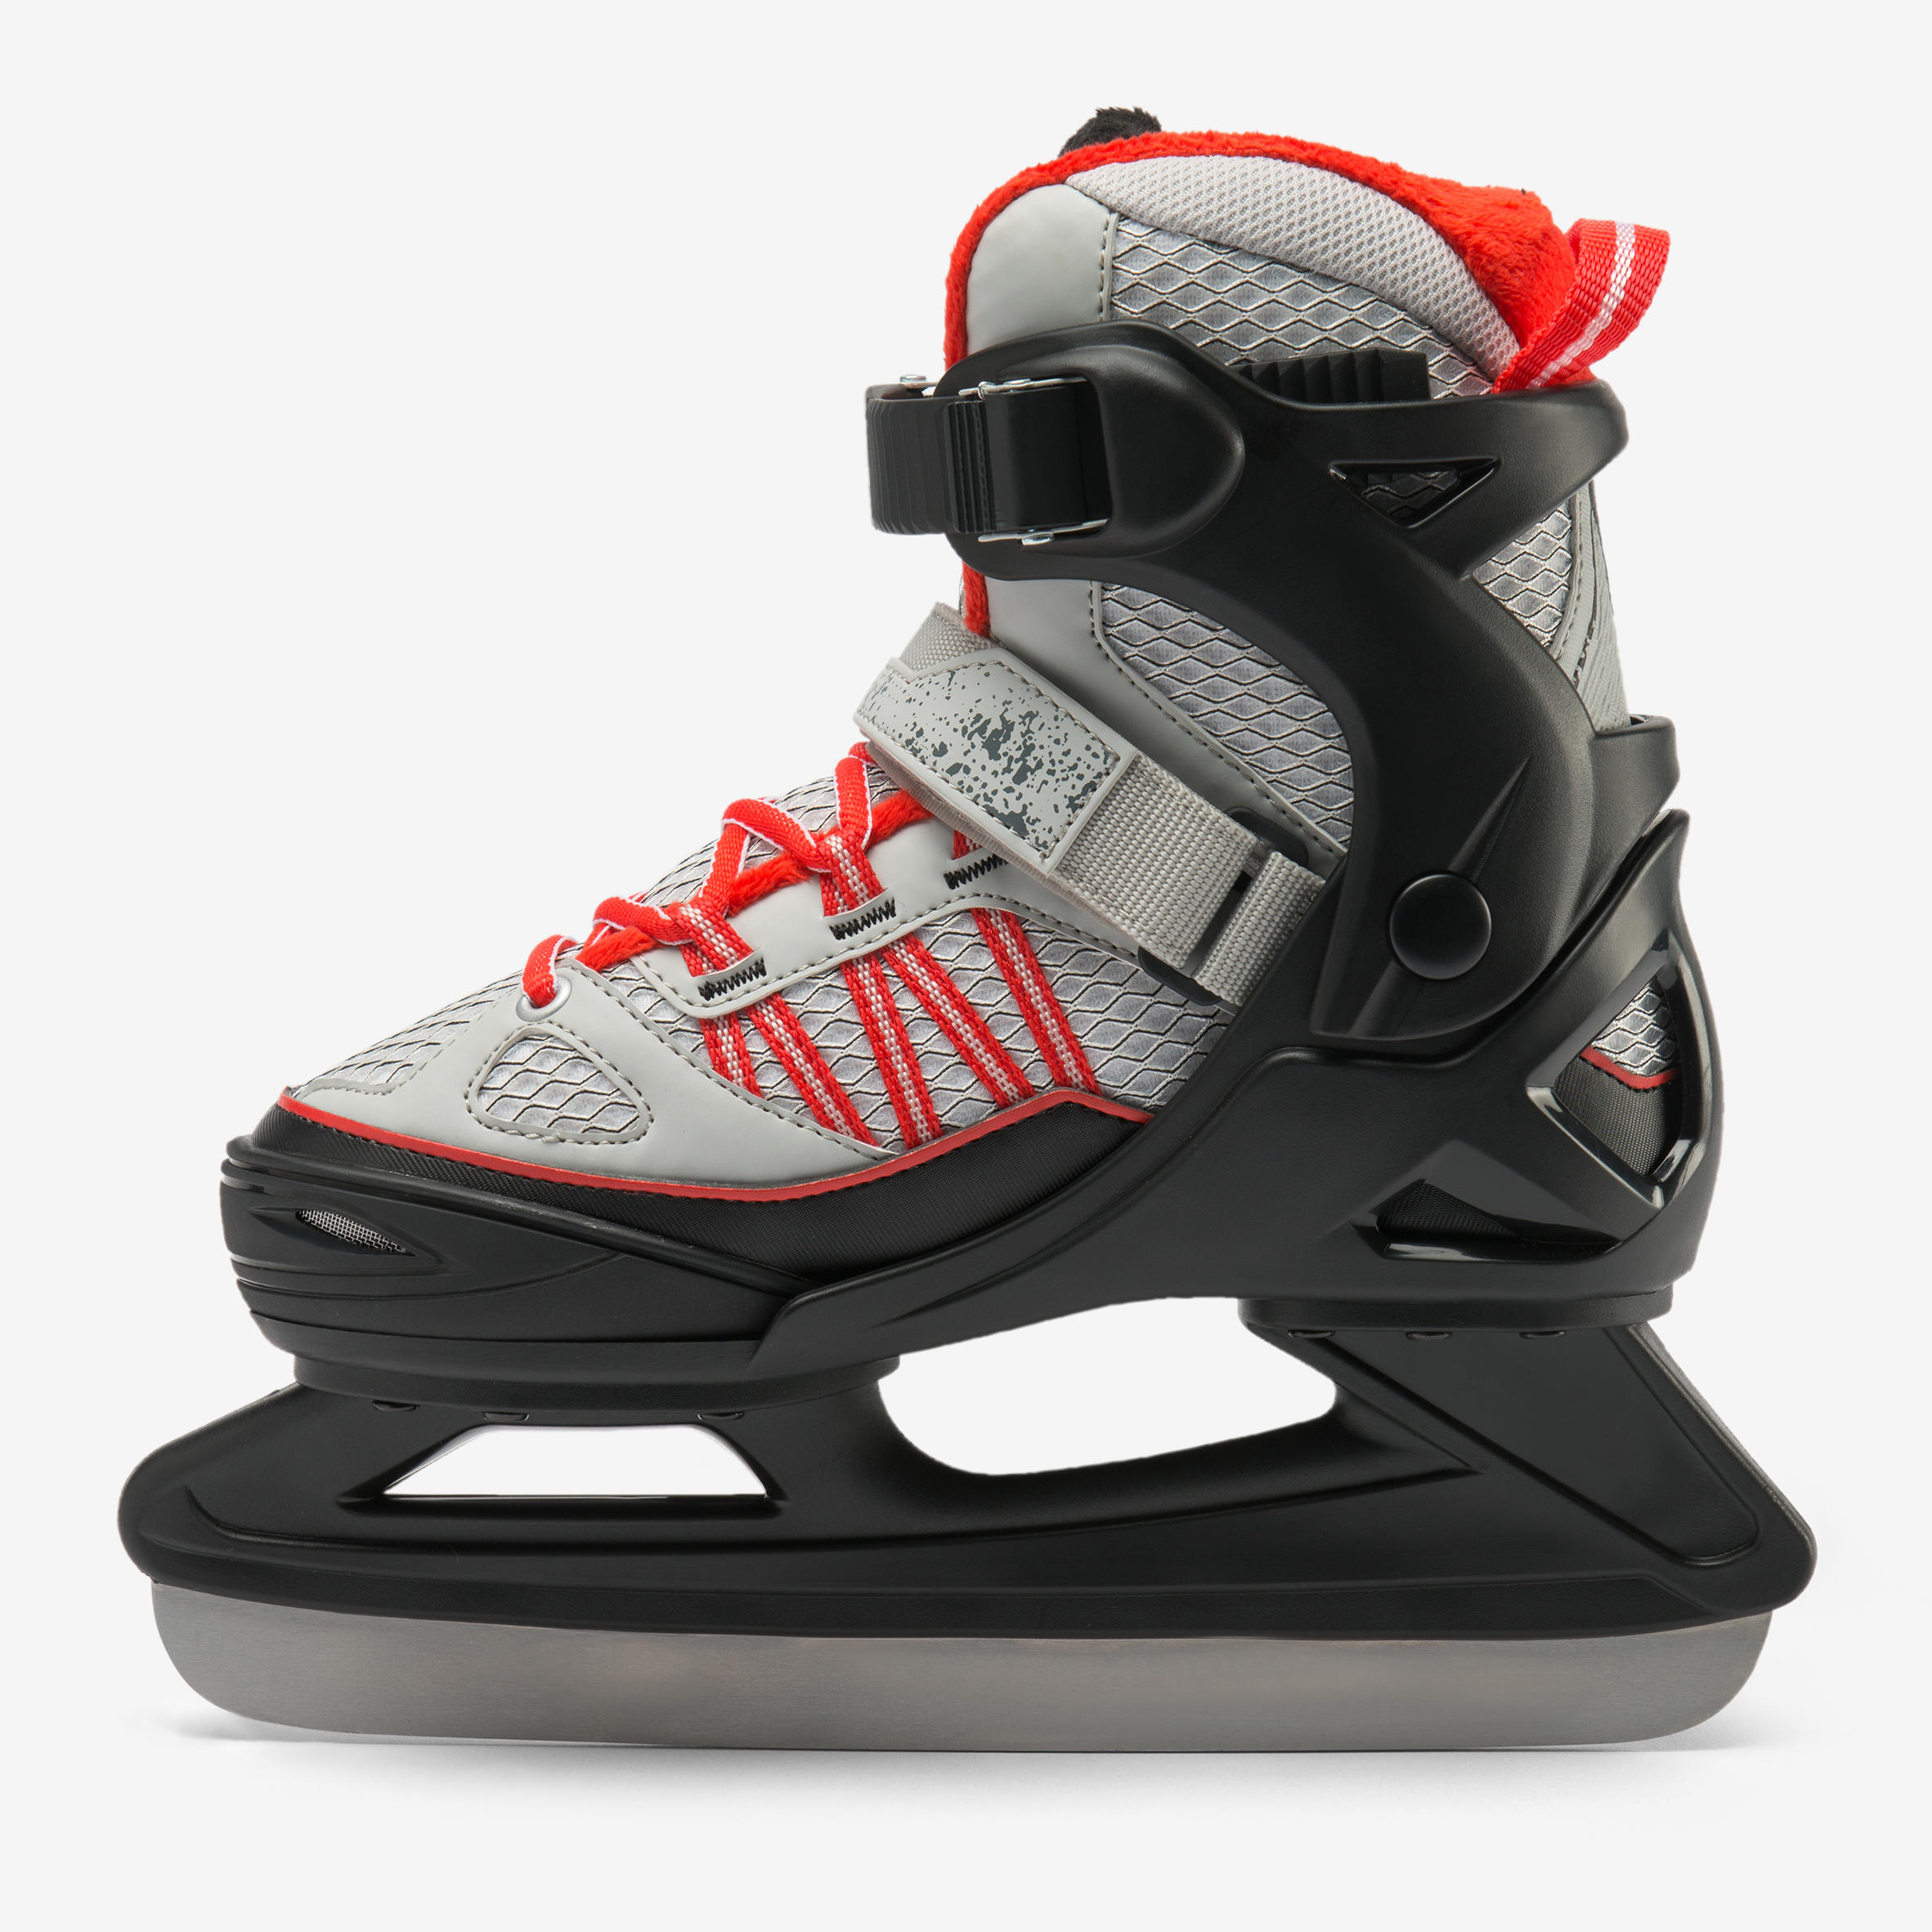 Kids' Ice Skates - FIT 500 Grey/Red - OXELO